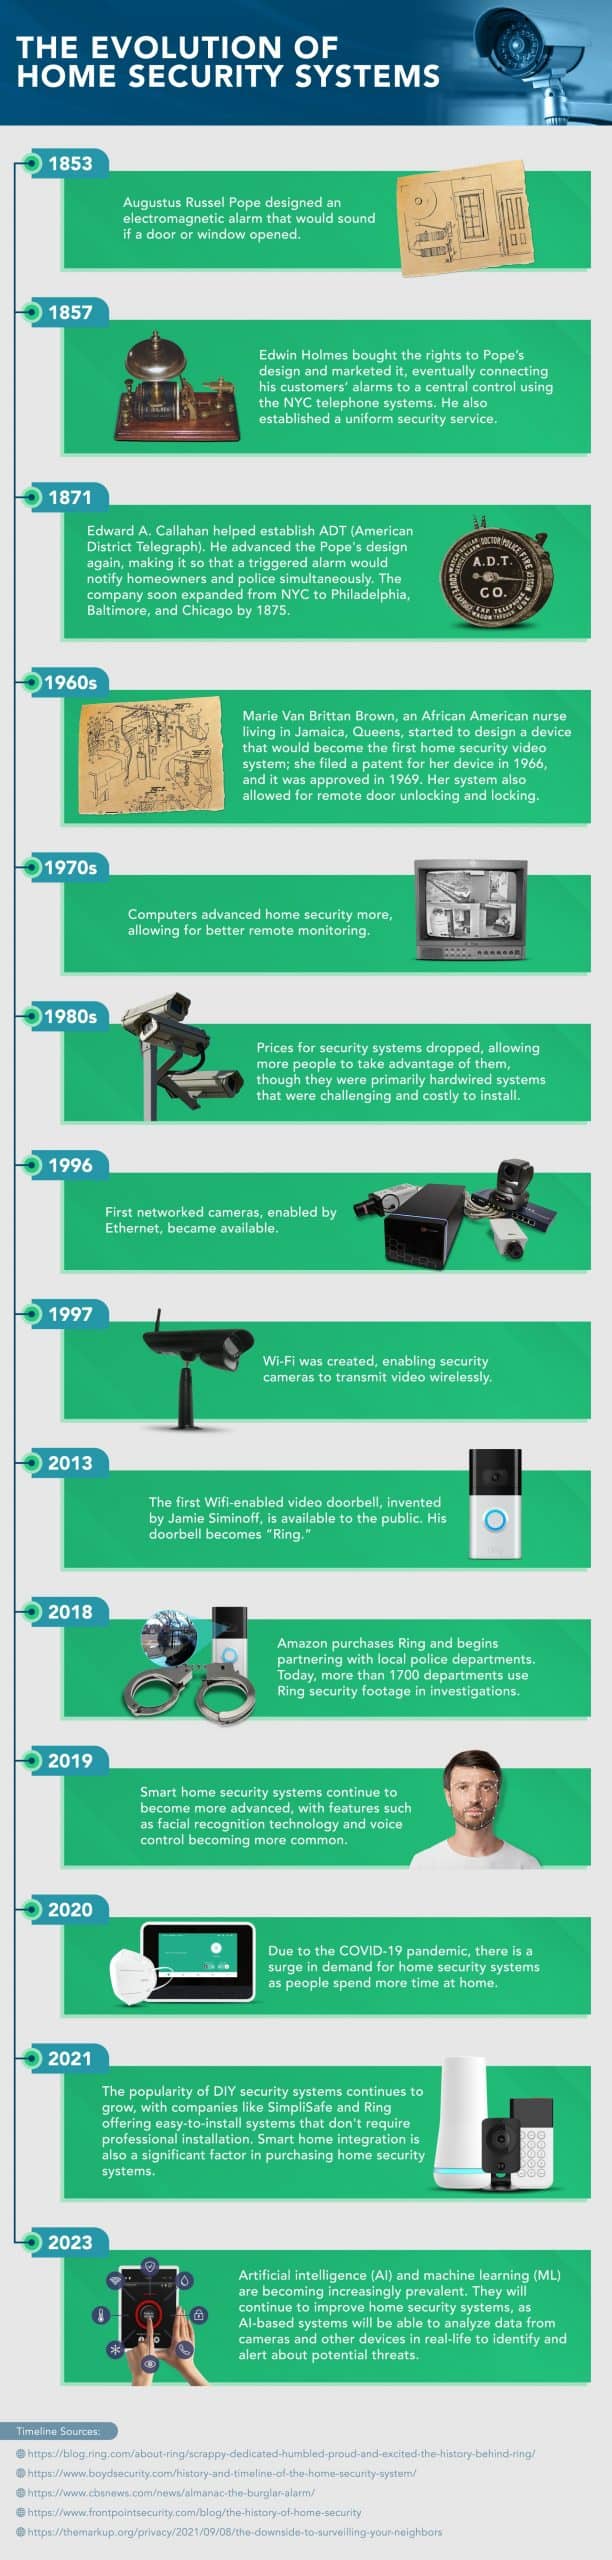 Evolution of Home Security Systems